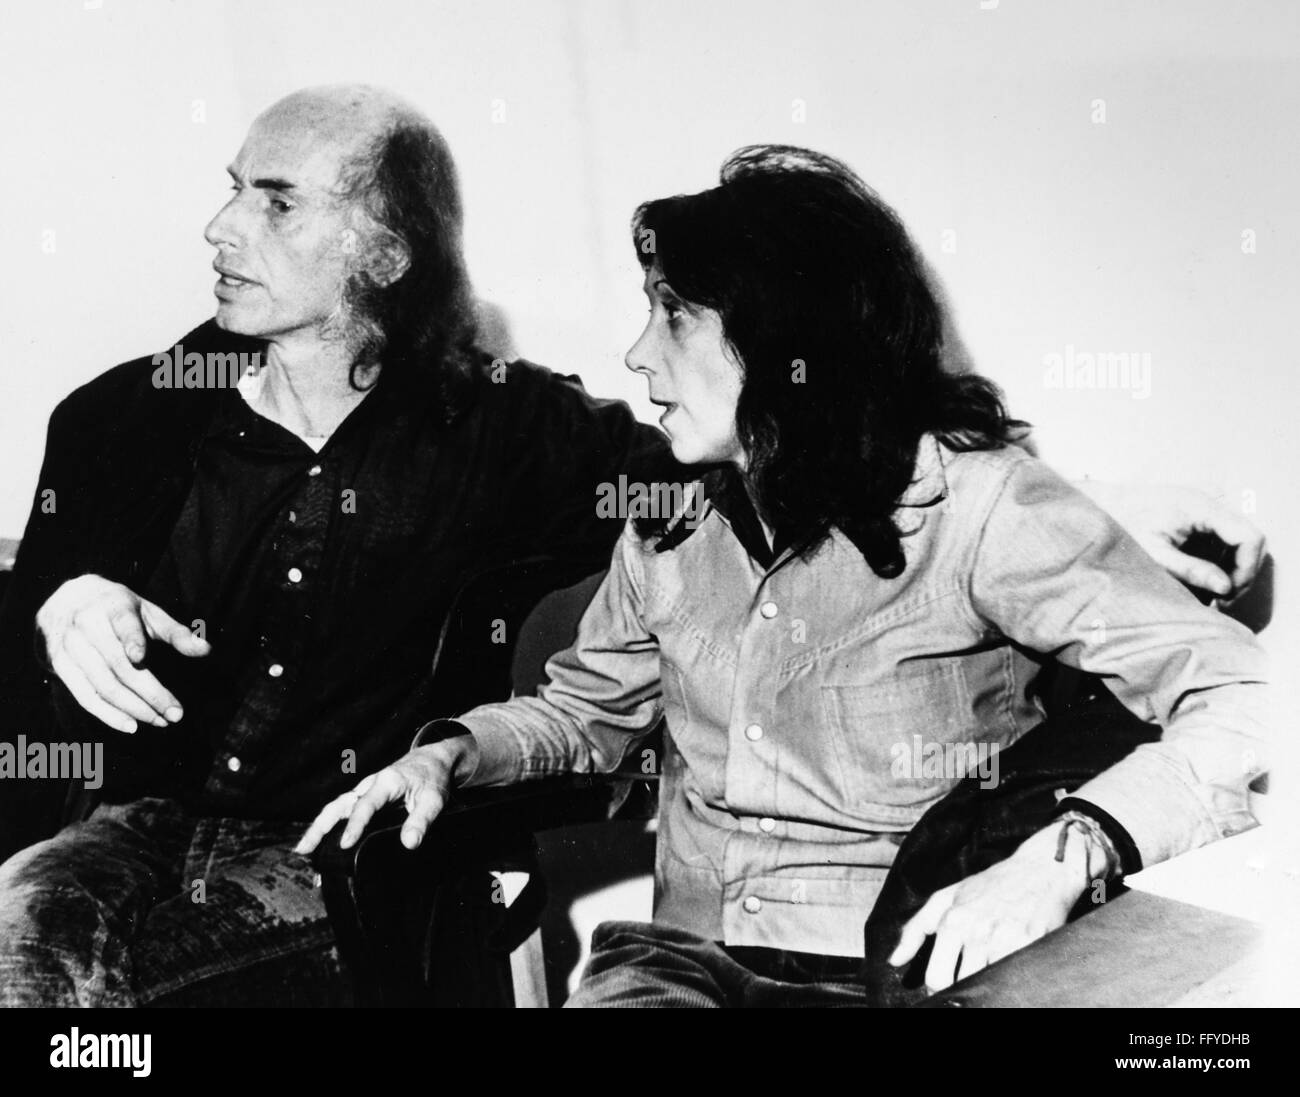 JULIAN BECK (1925-1985). /nAmerican actor, director, poet, and painter. Photographed with his wife, Judith Malina, while detained at the police station in Ouro Preto, Brazil, following a drug raid on a party, 7 March 1971. Stock Photo